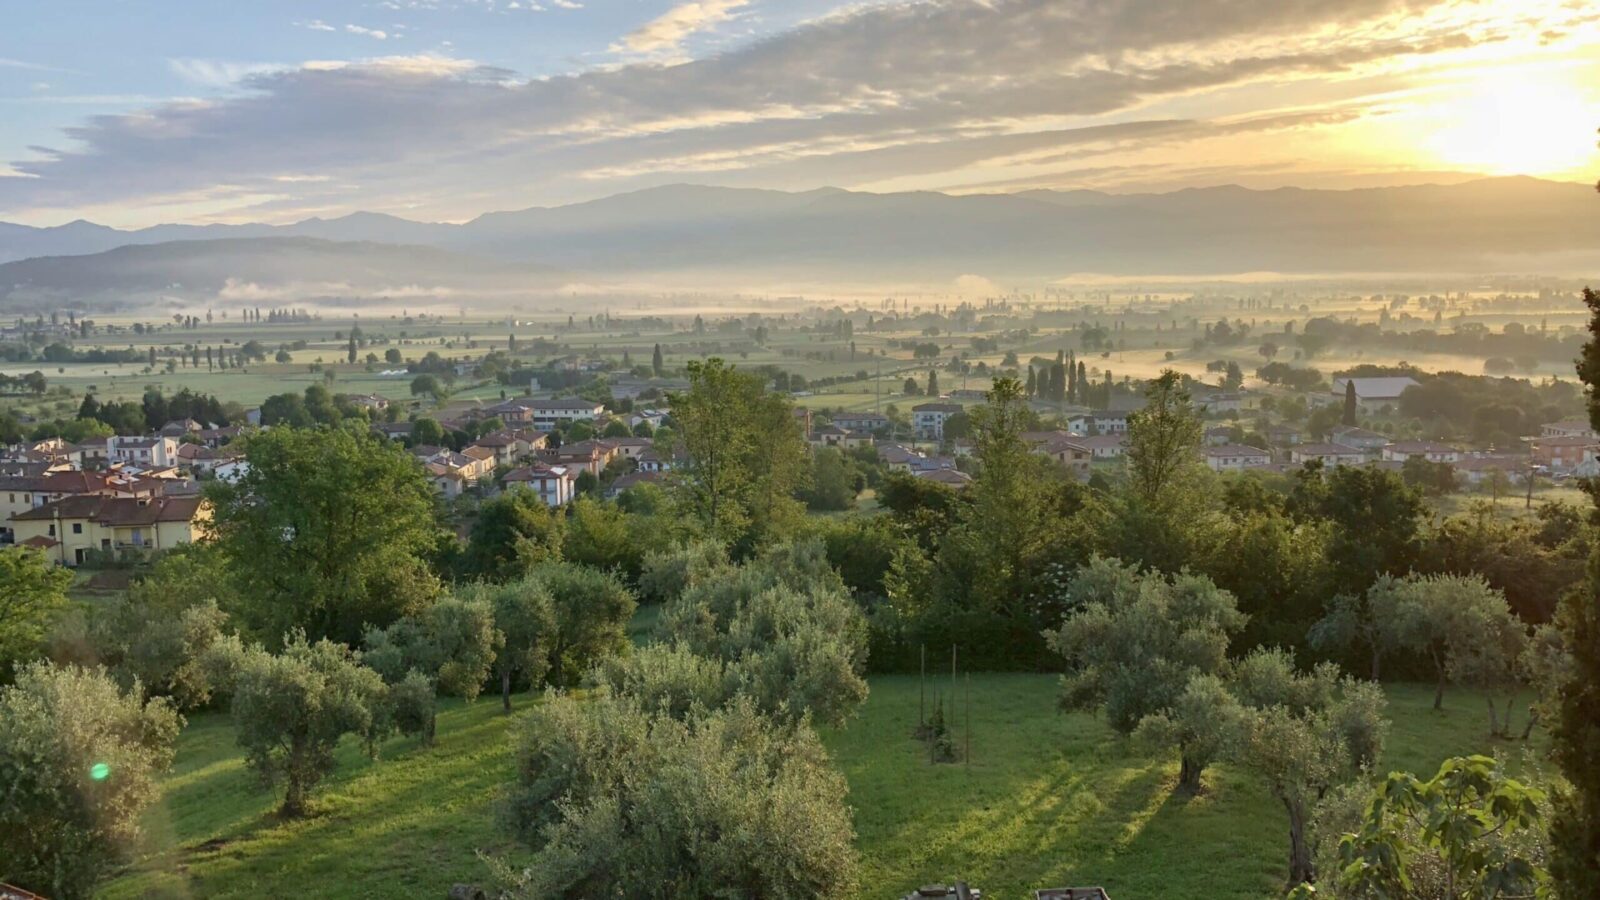 dawn over the Valtiberina valley from Anghiari in Tuscany, Italy